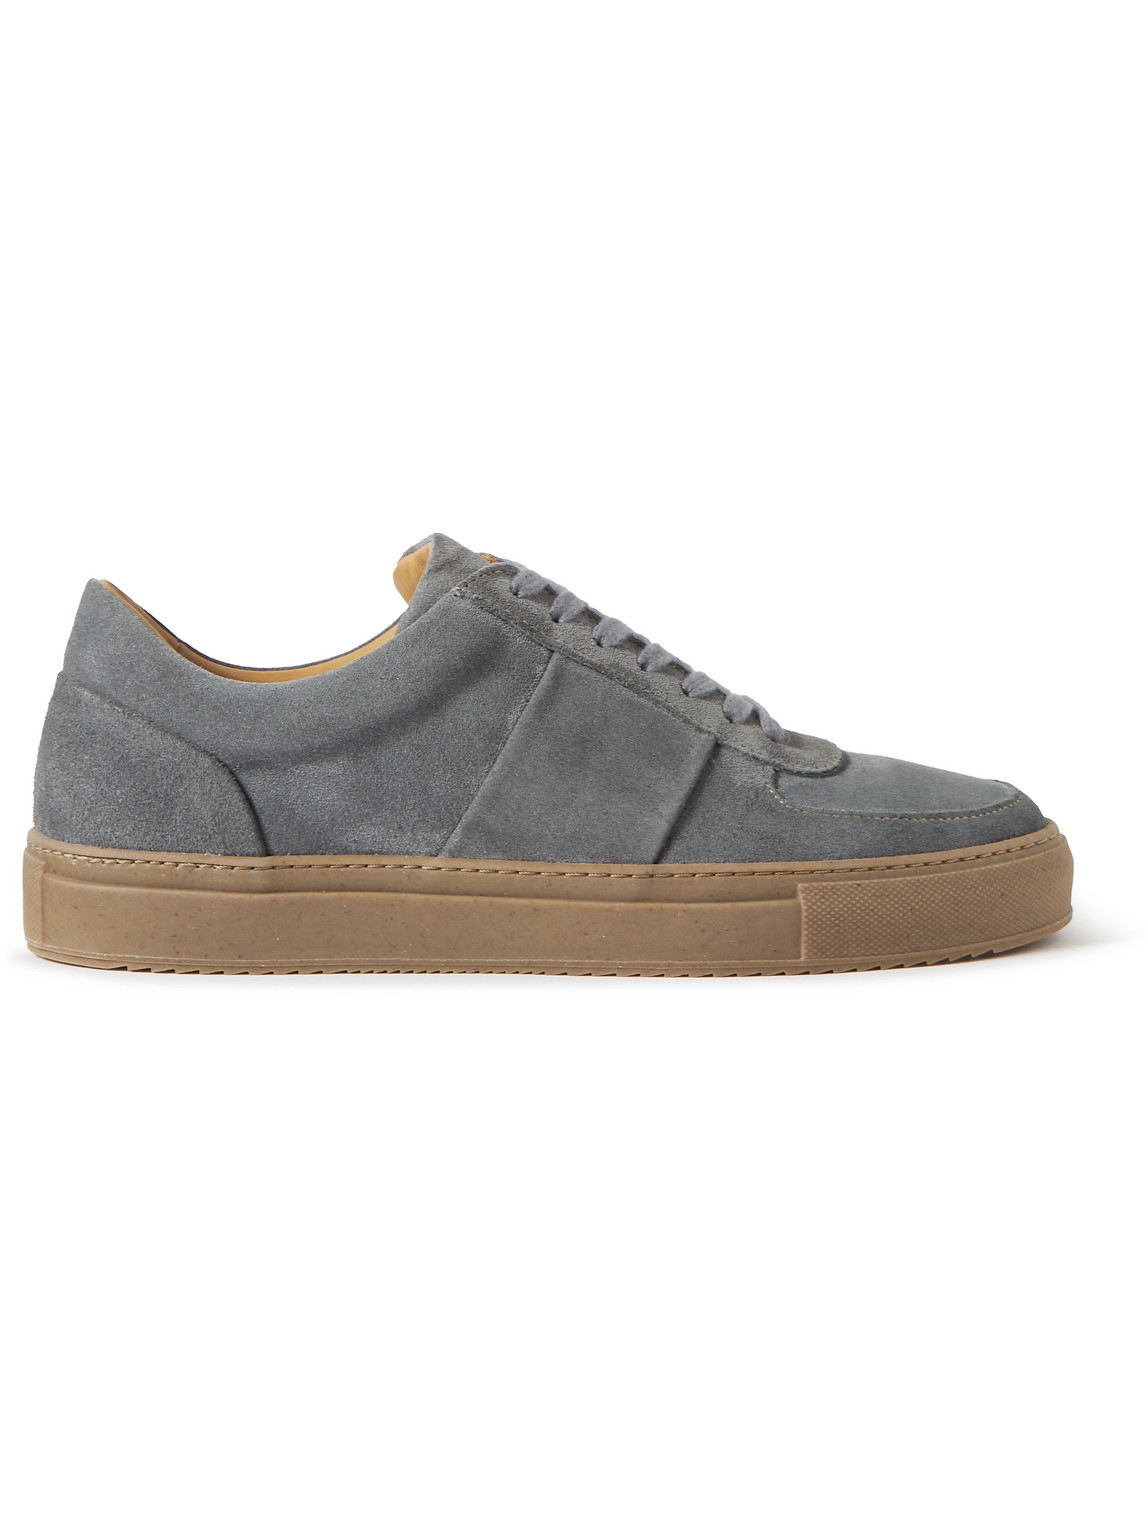 Larry Regenerated Suede by evolo® Sneakers